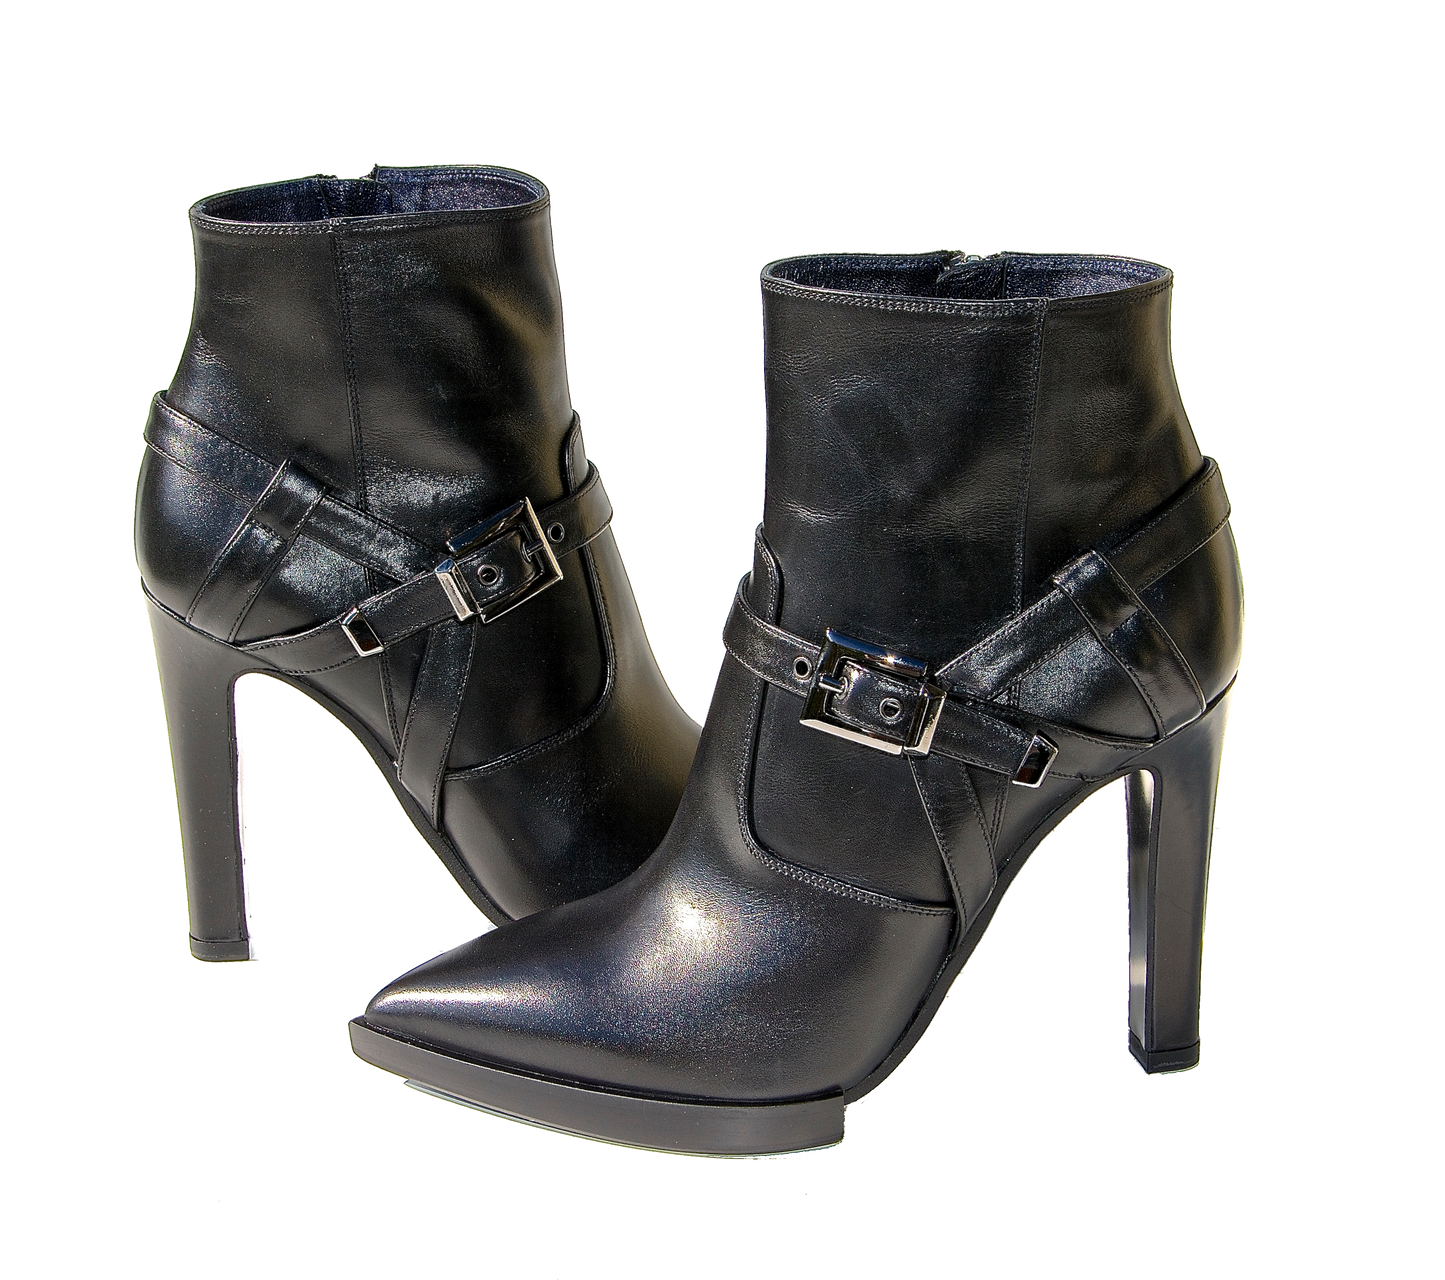 High heel ankle boots in black